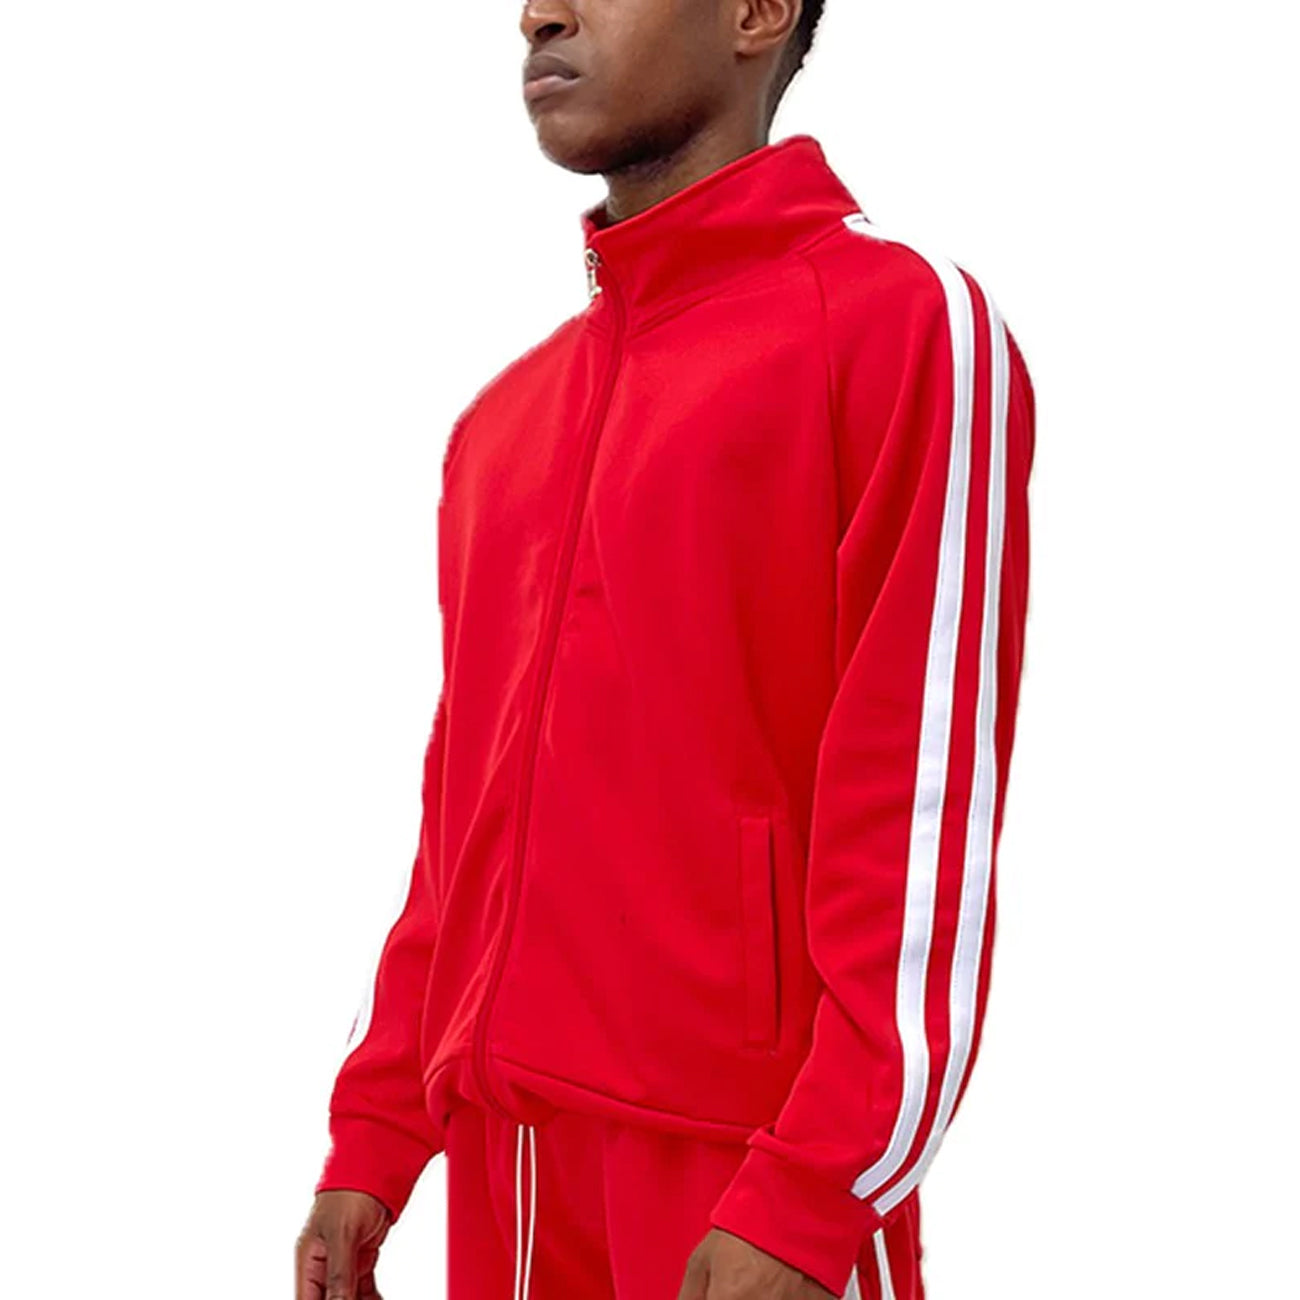 Two Stripe Track Jacket - Red